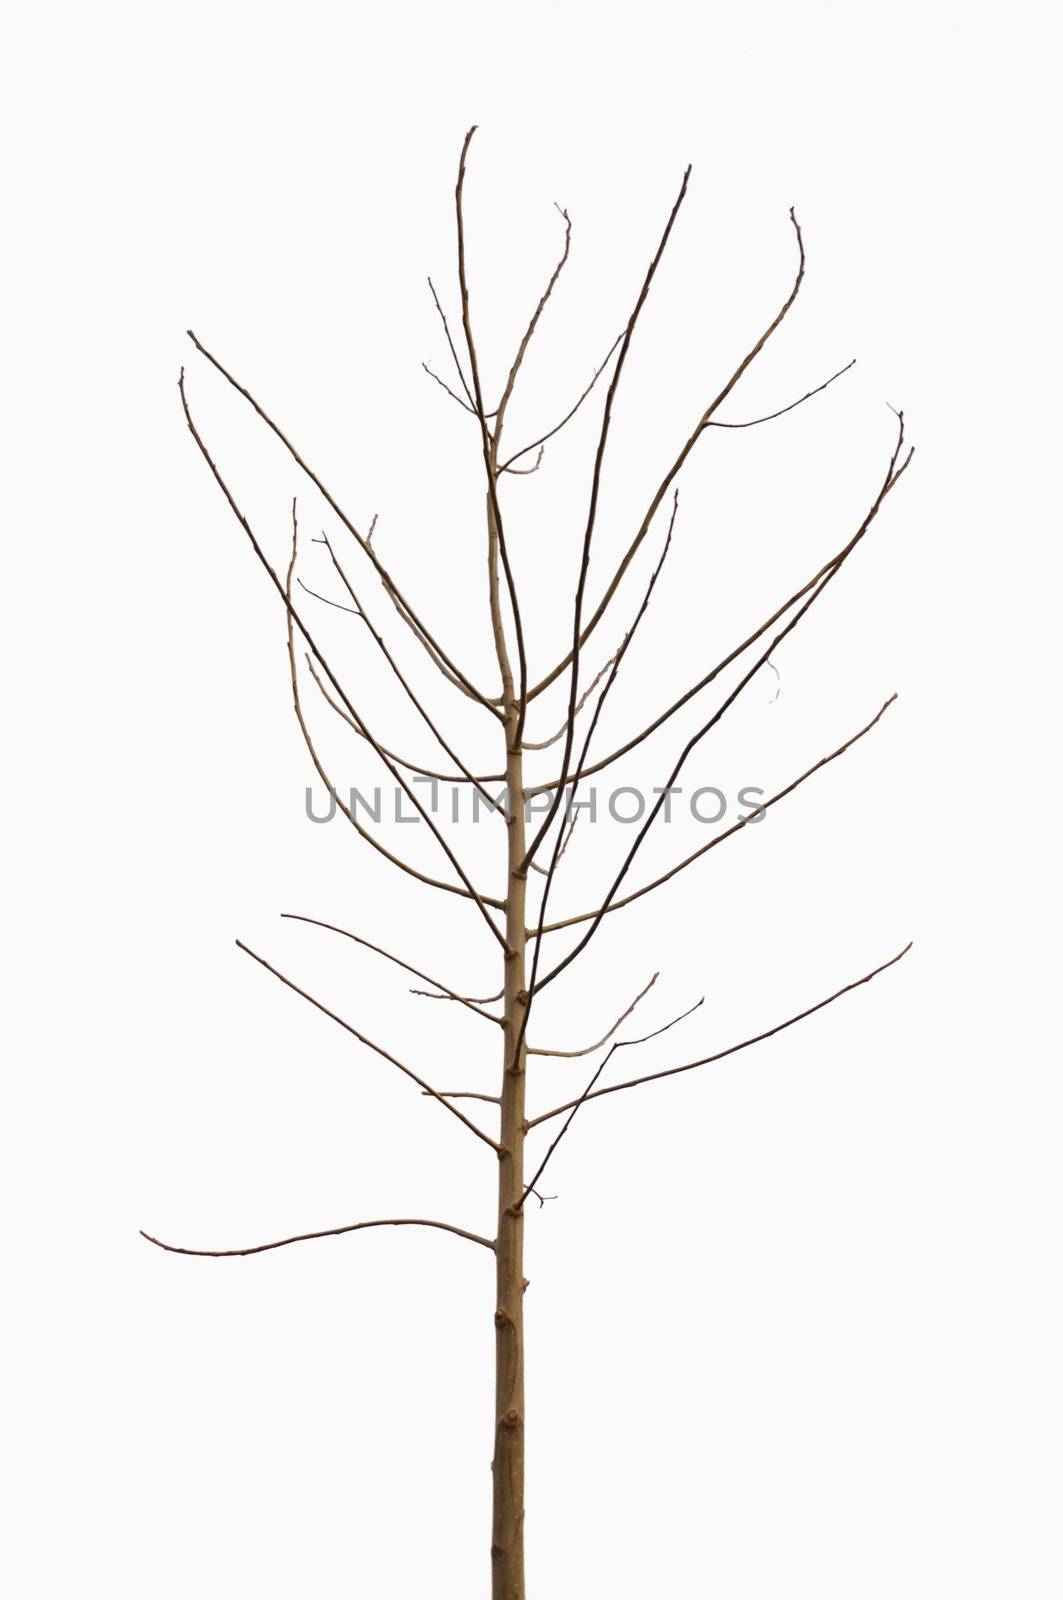 lonely young tree, without leaves, isolated on white background